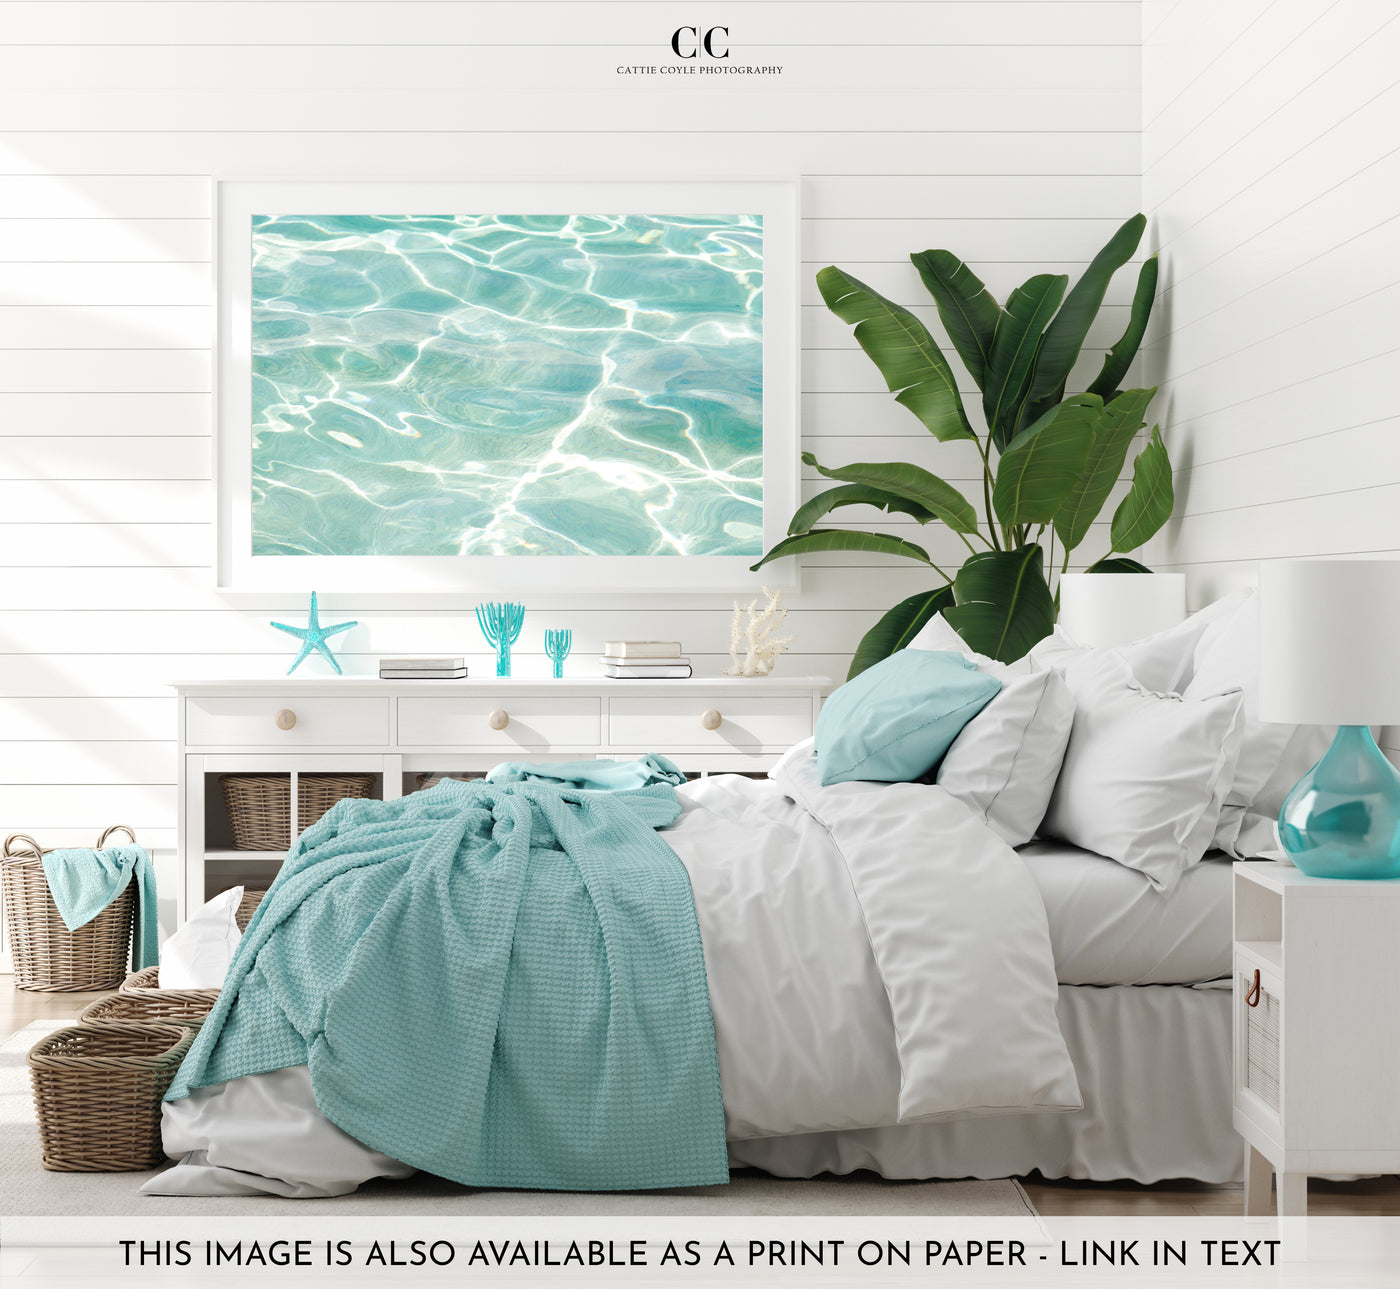 Caribbean Sea No 3 - Fine art print by Cattie Coyle Photography in bedroom